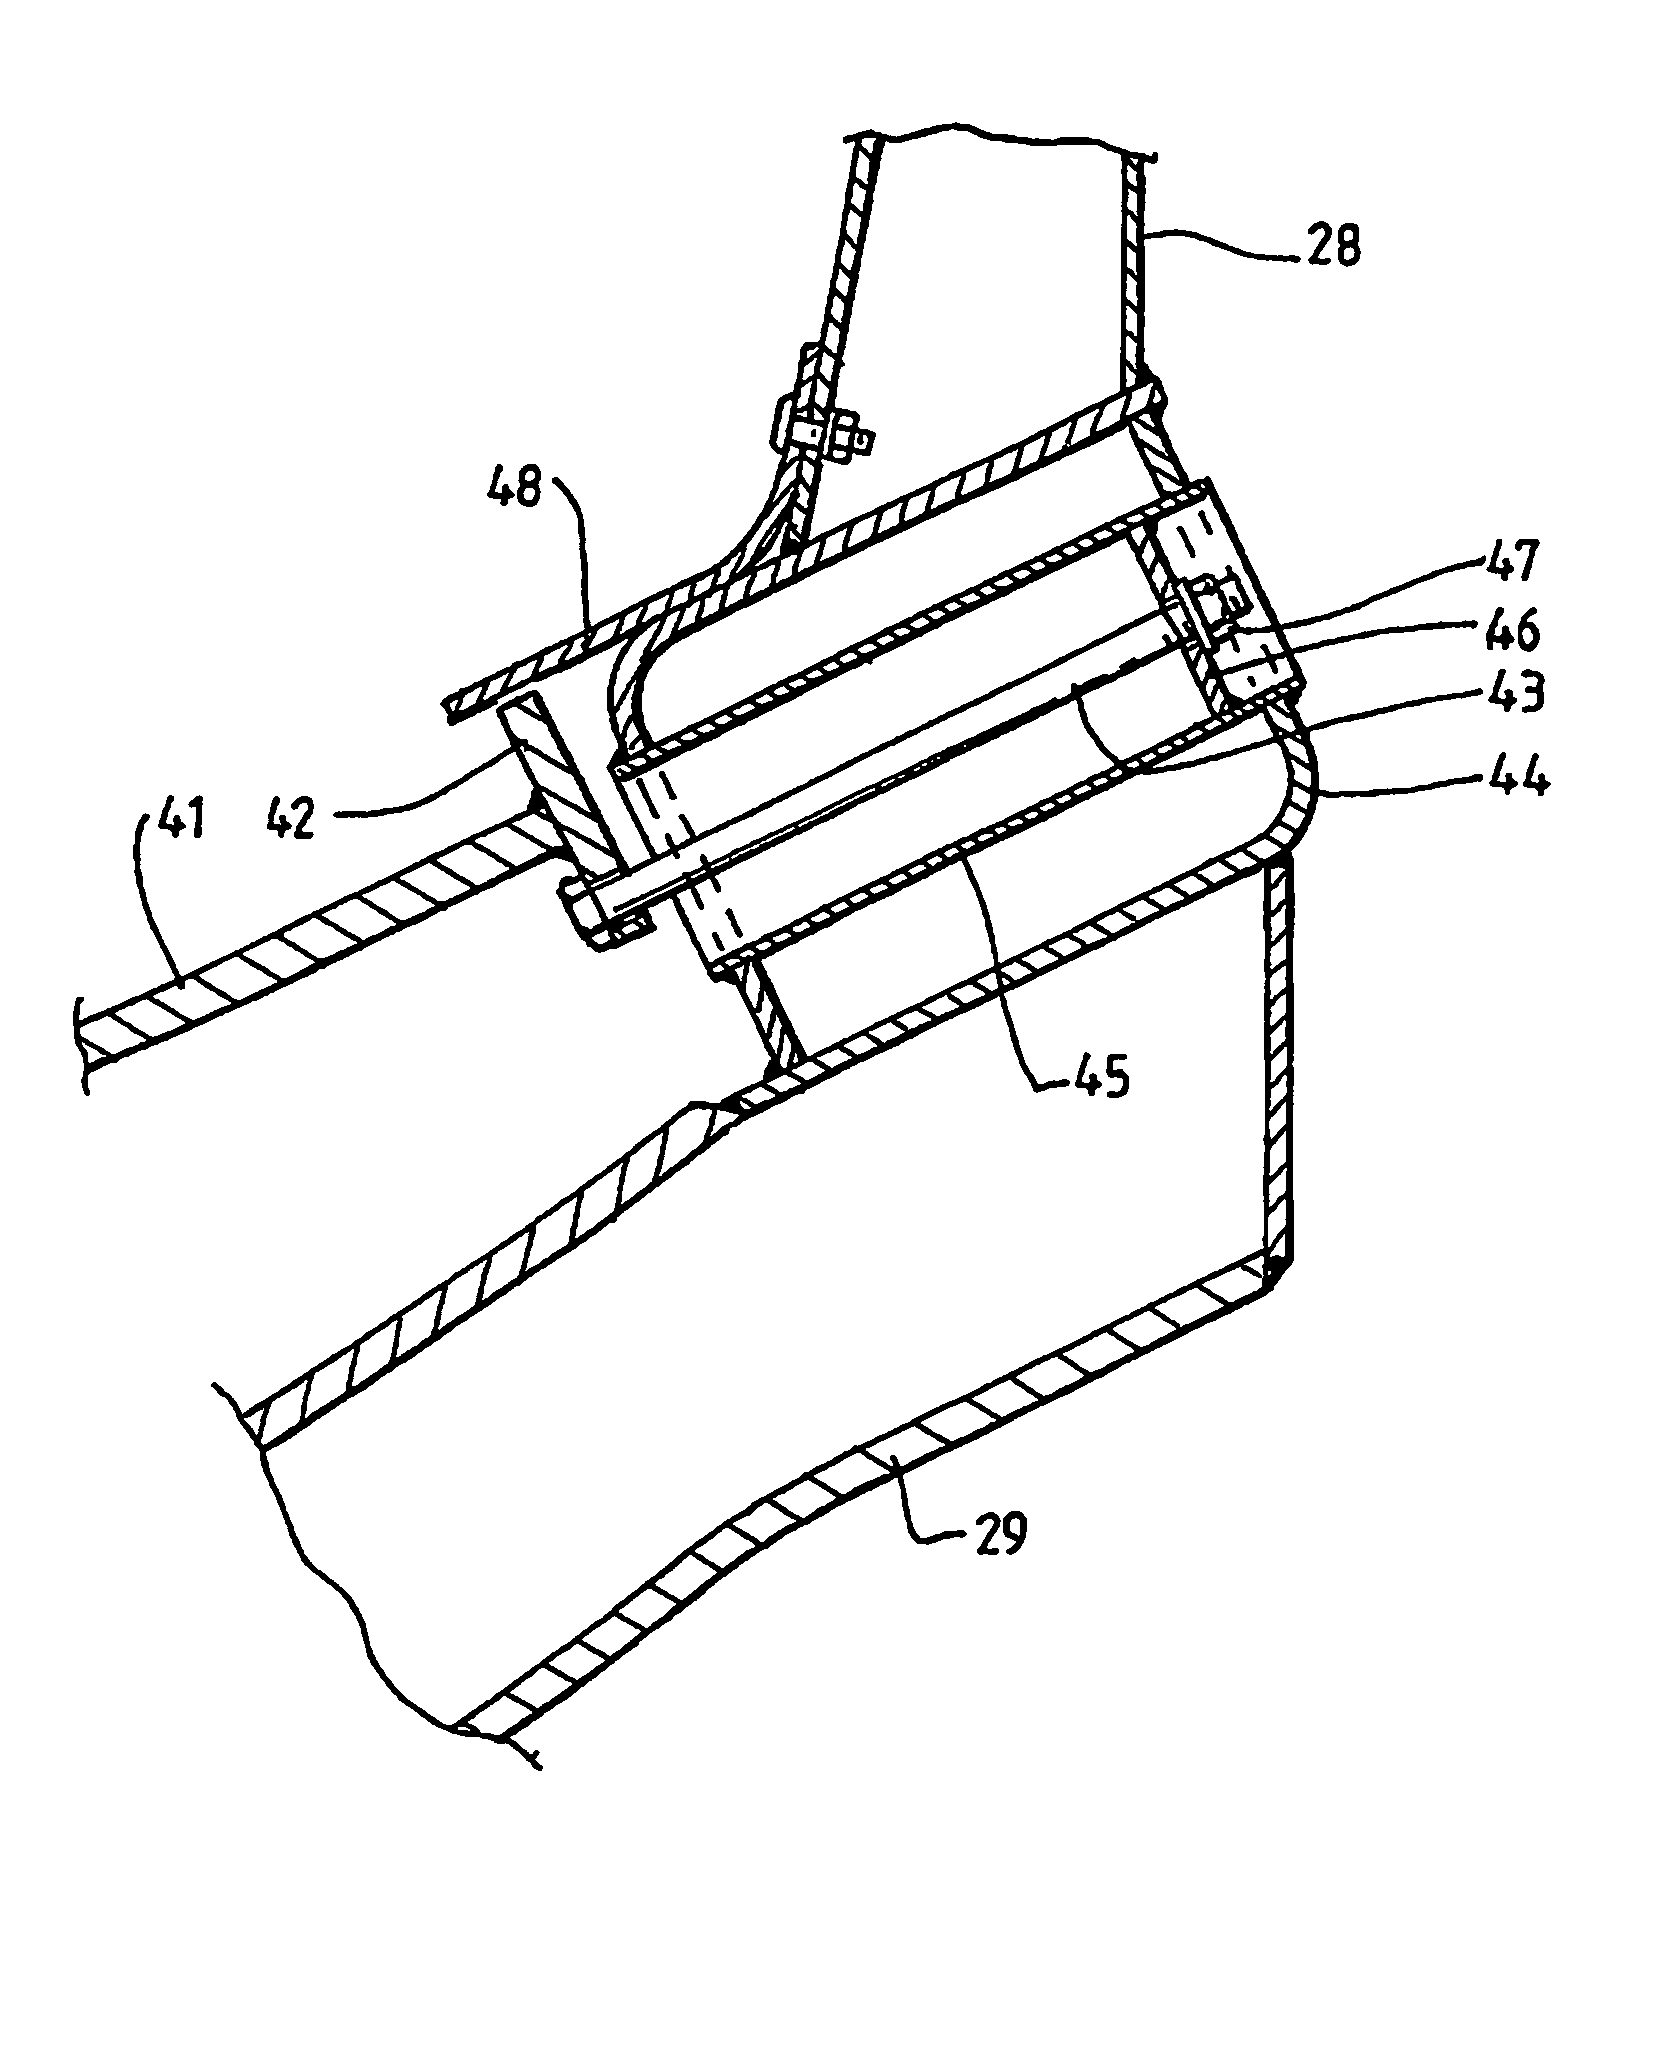 Vehicle body with a curved metal plate floor